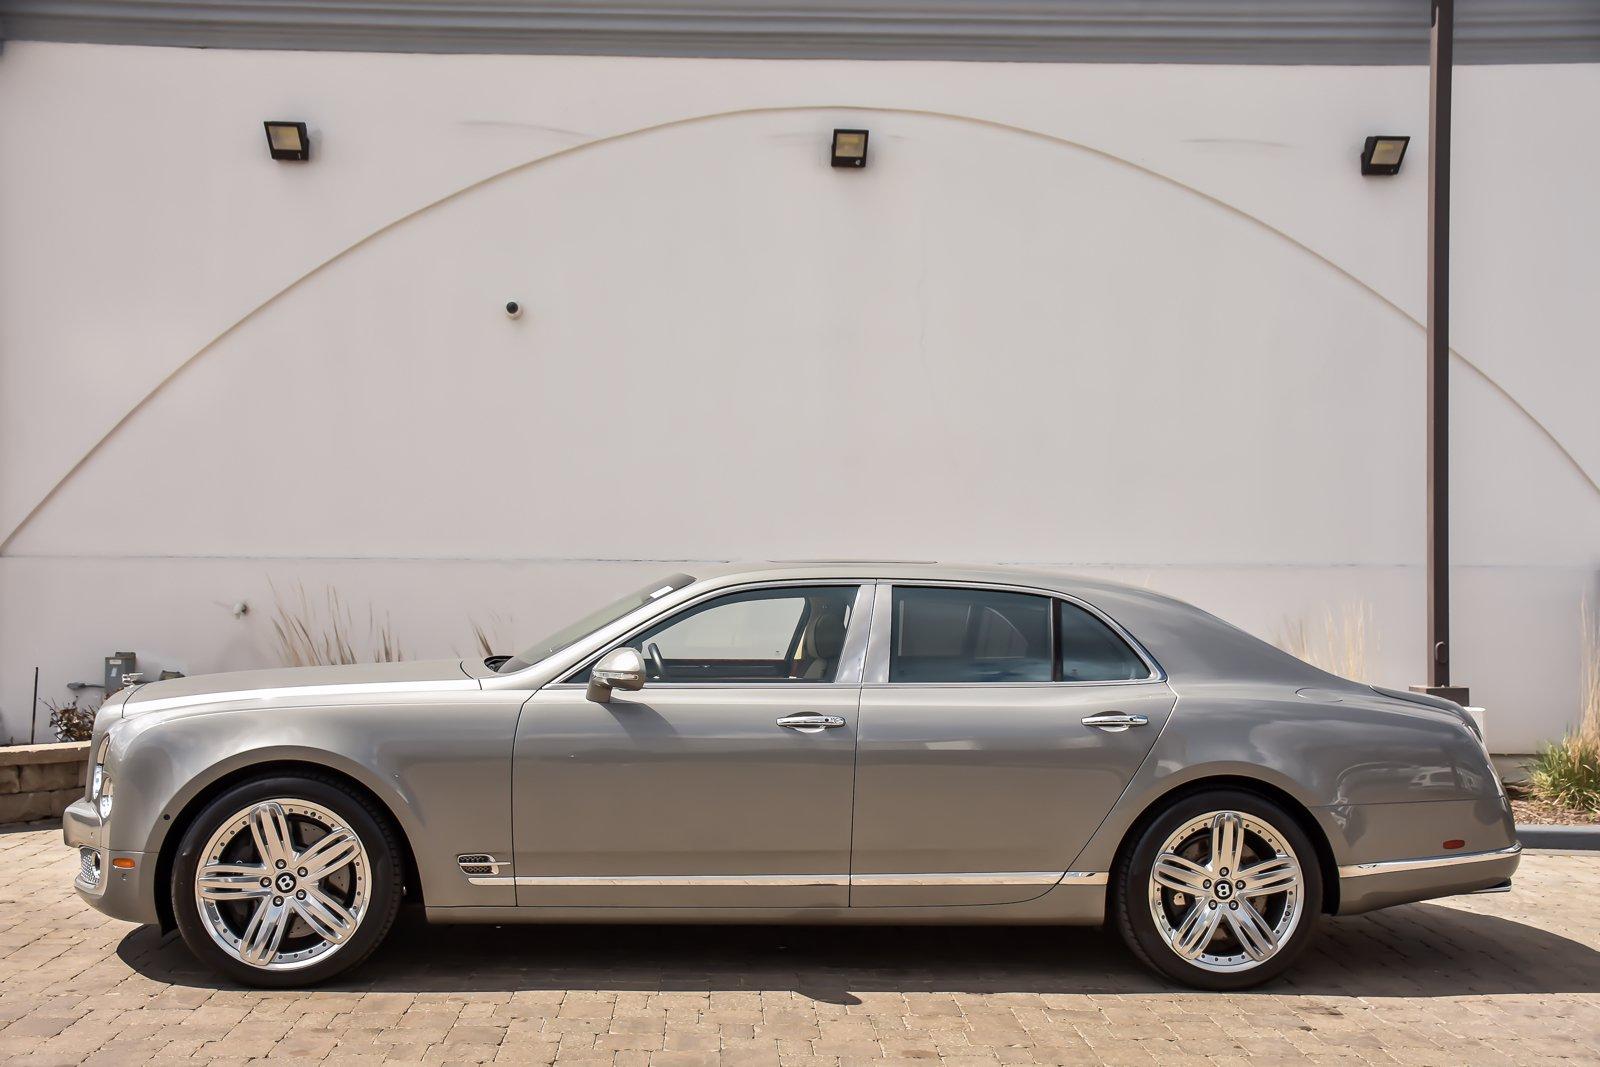 Used 2014 Bentley Mulsanne Premier, Naim, Rear Ent, | Downers Grove, IL